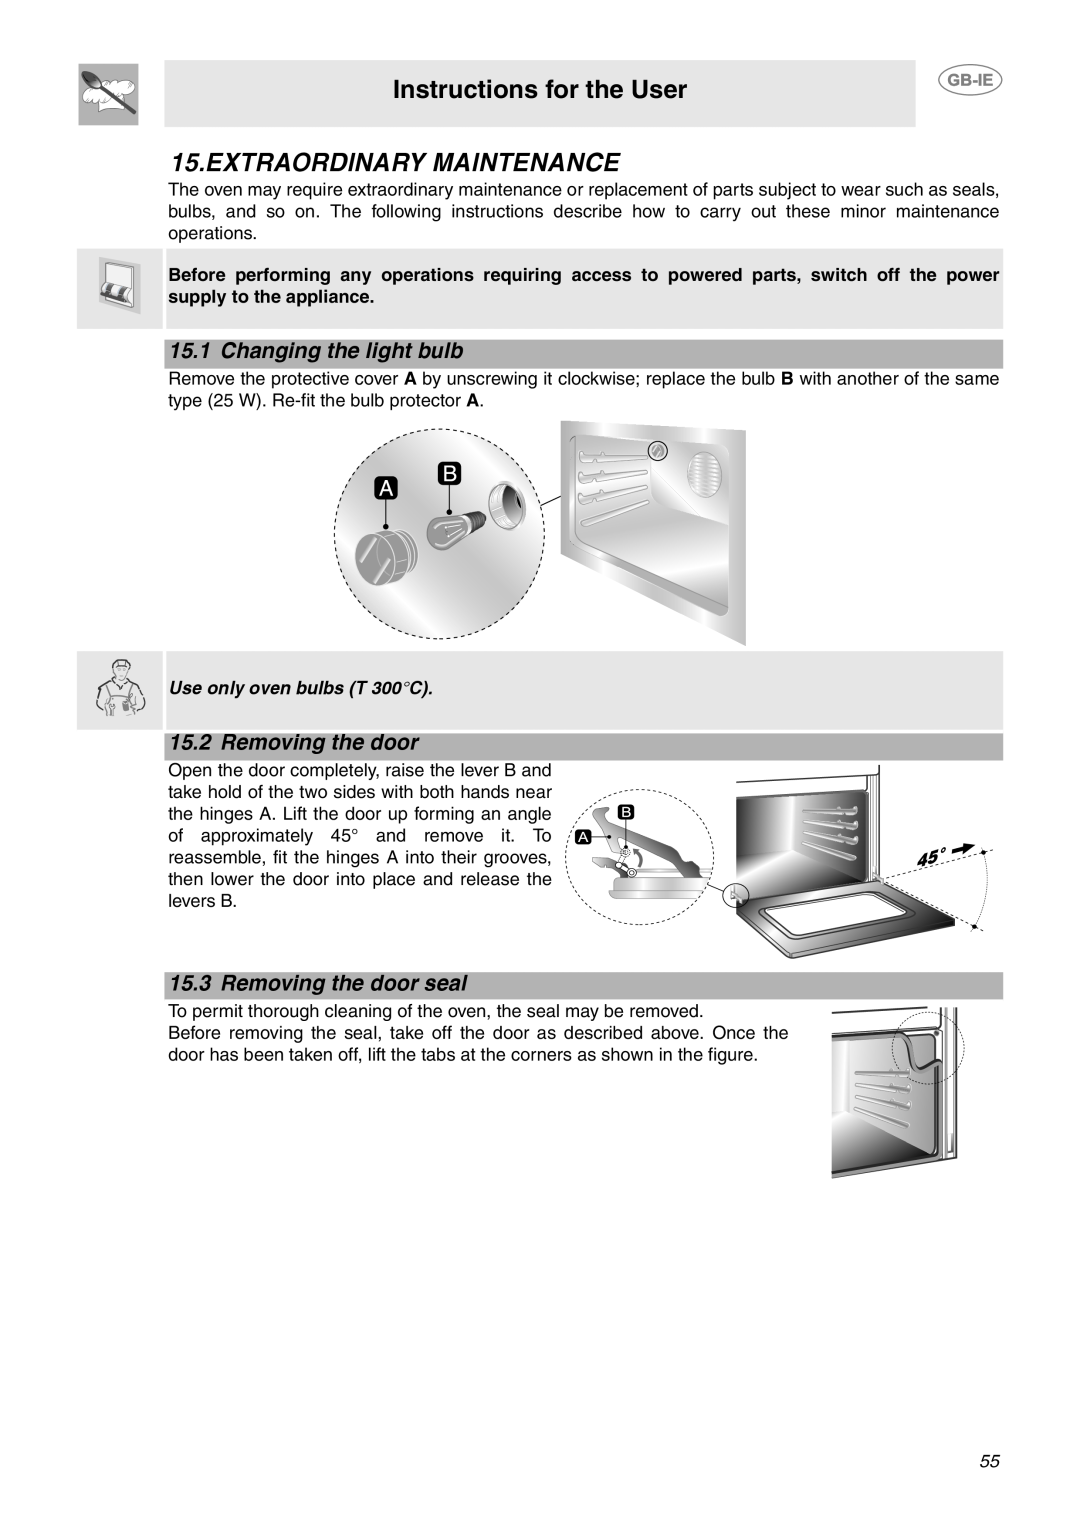 Smeg CE92IMX Extraordinary Maintenance, Changing the light bulb, Removing the door seal, Instructions for the User 